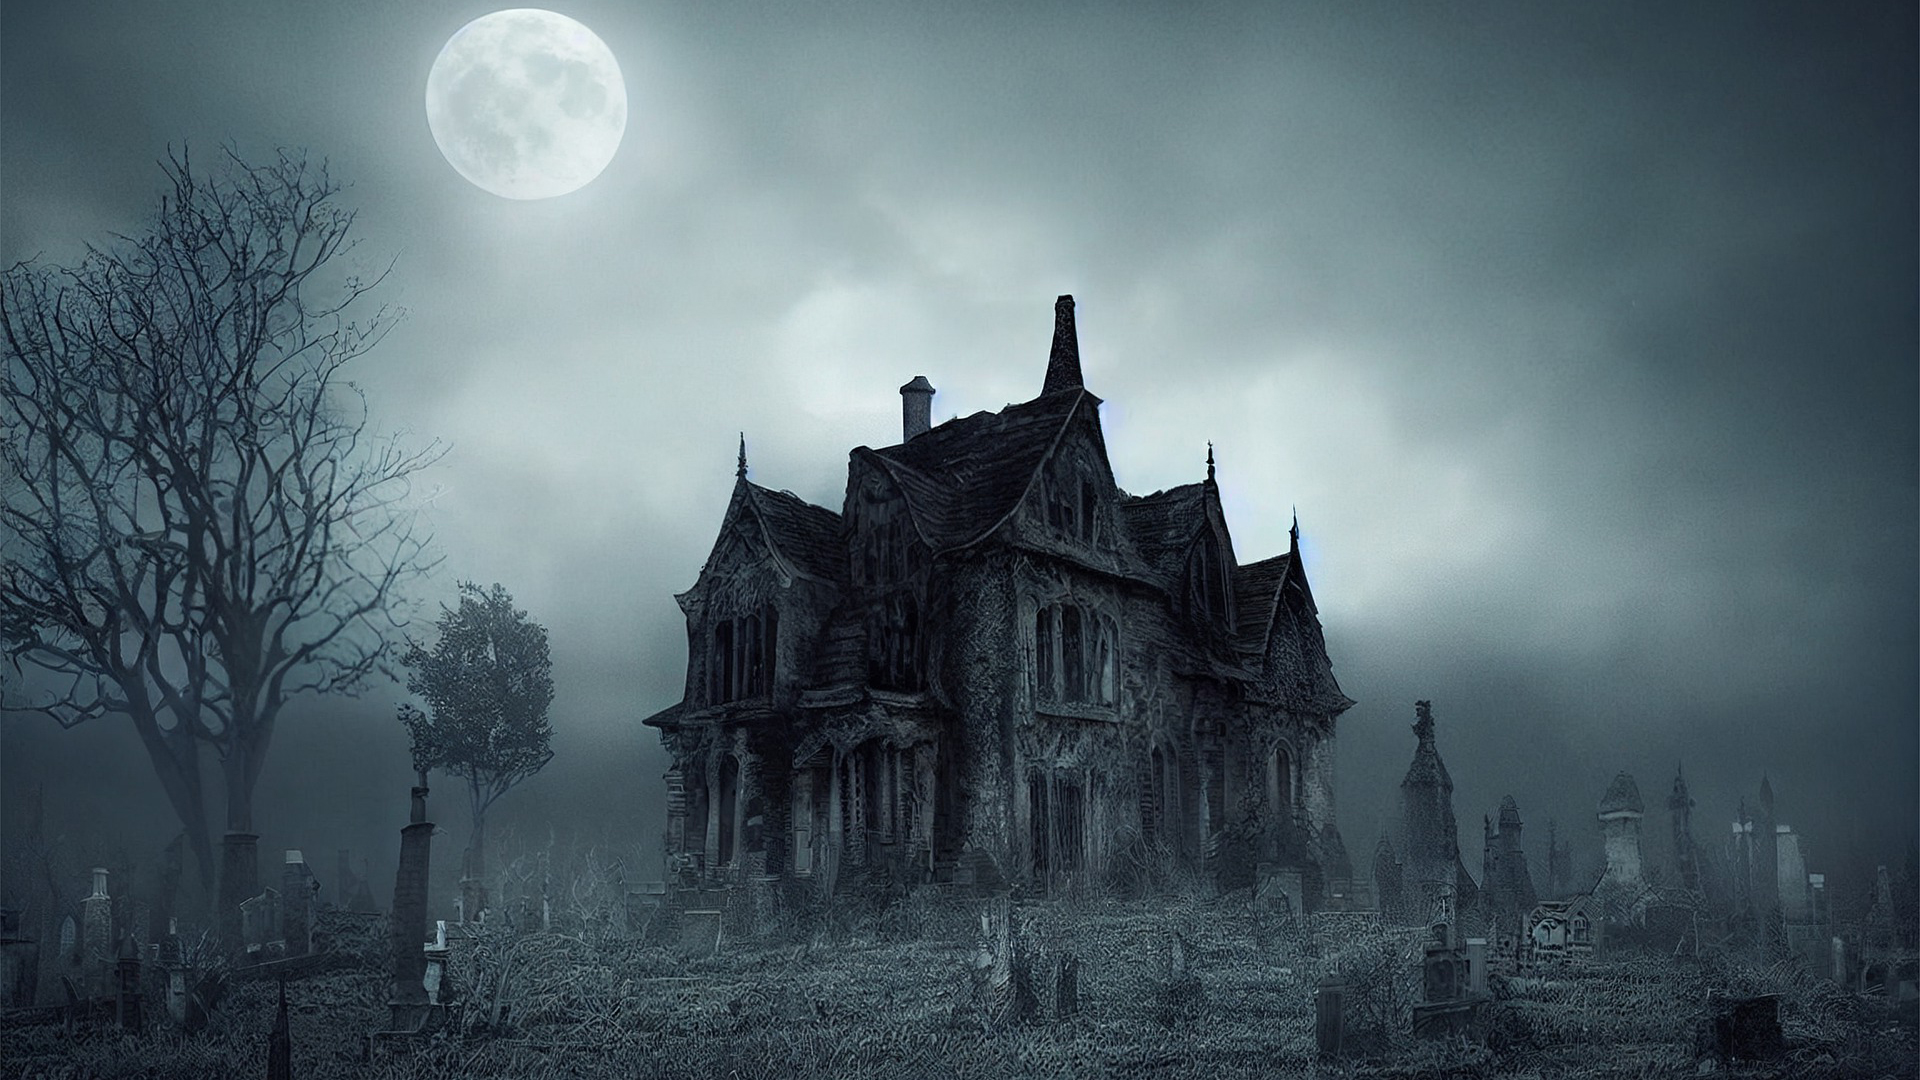 A haunted house in a graveyard with a full moon